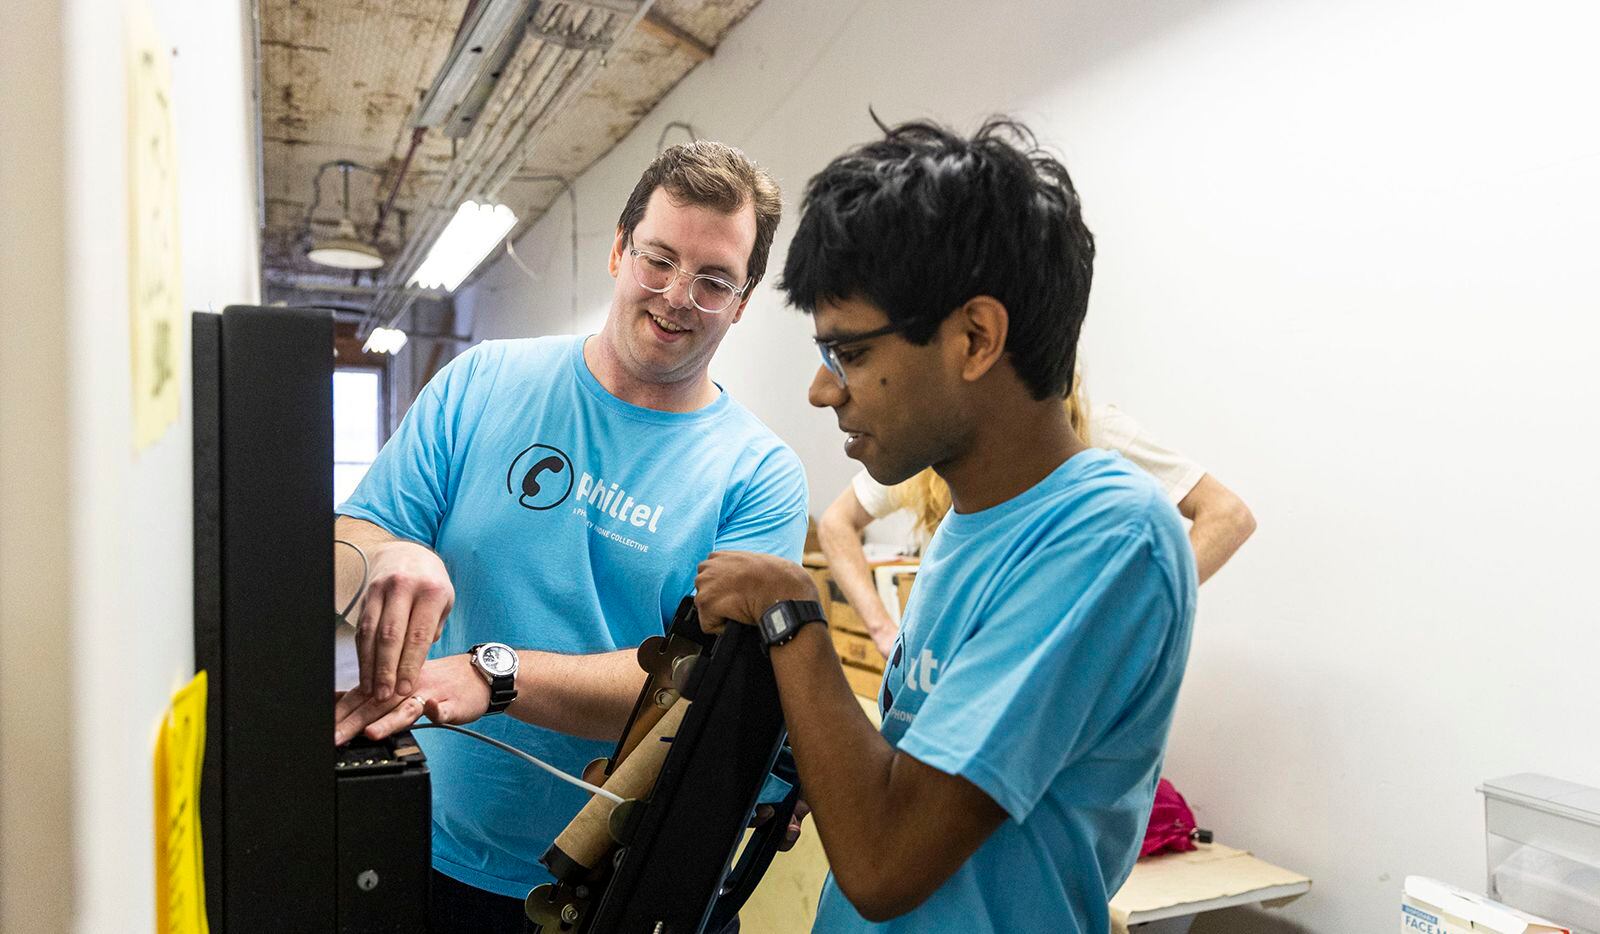 The co-founders of PhilTel, Mark Dank (left), and Naveen Albert, installed a free-to-use...